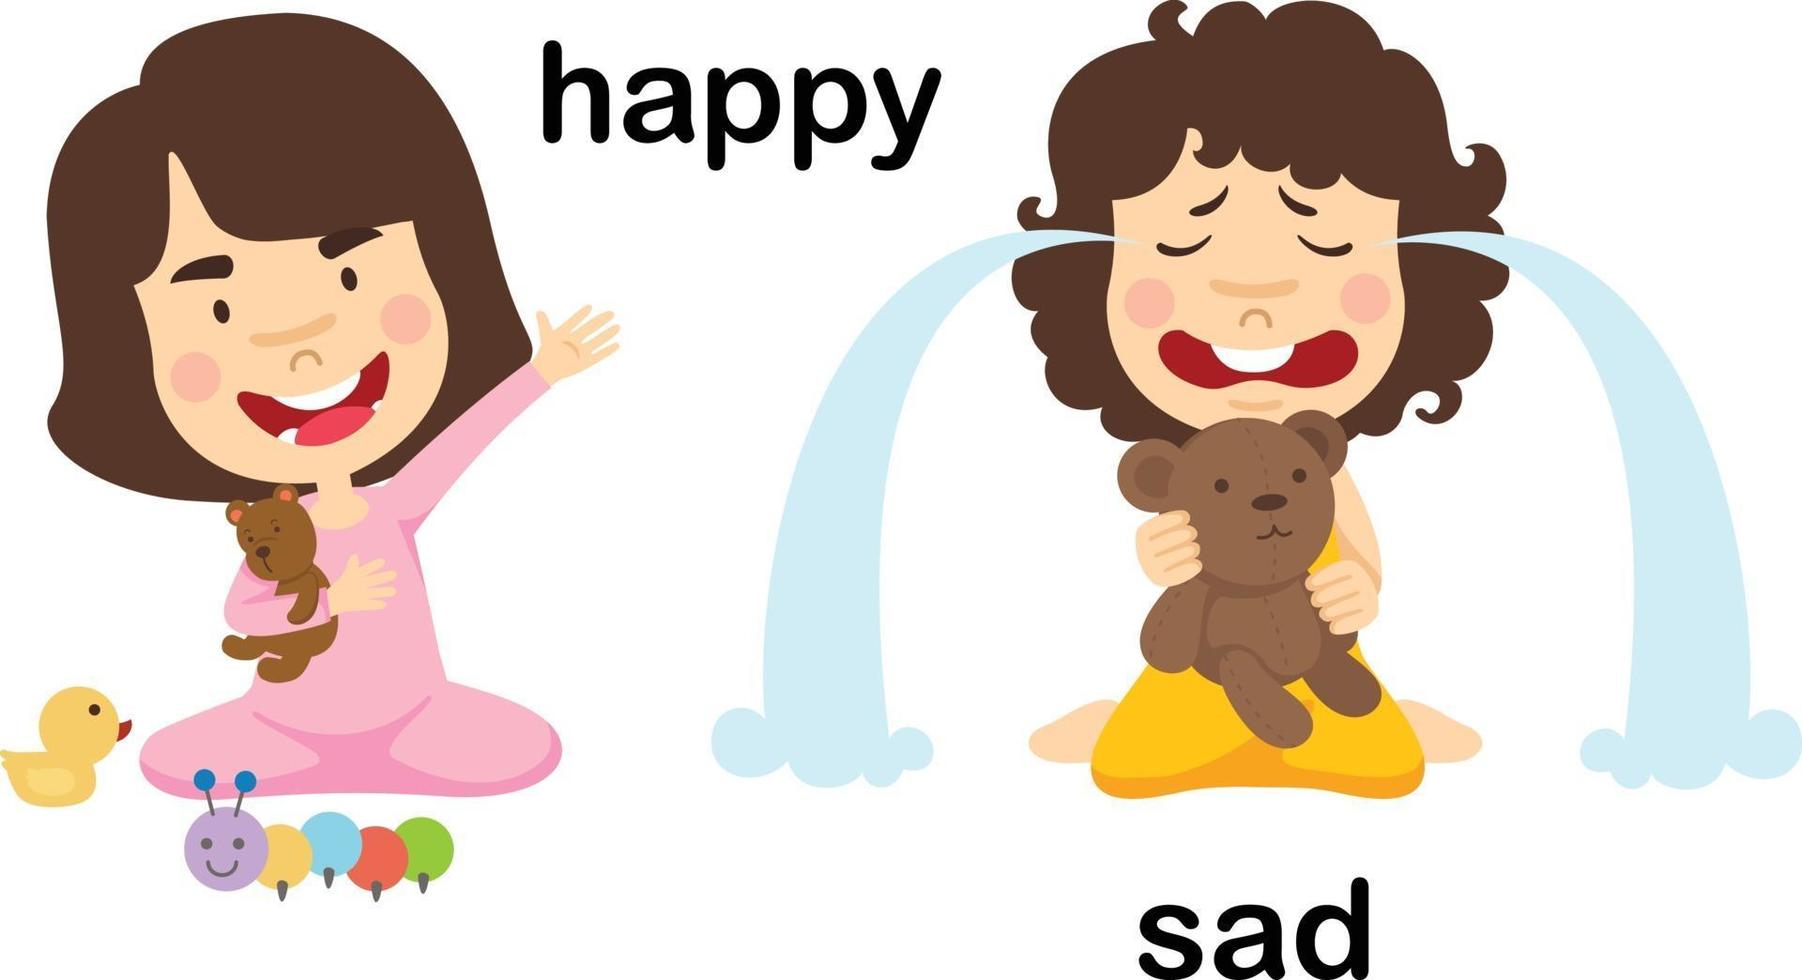 Opposite happy and sad  vector illustration